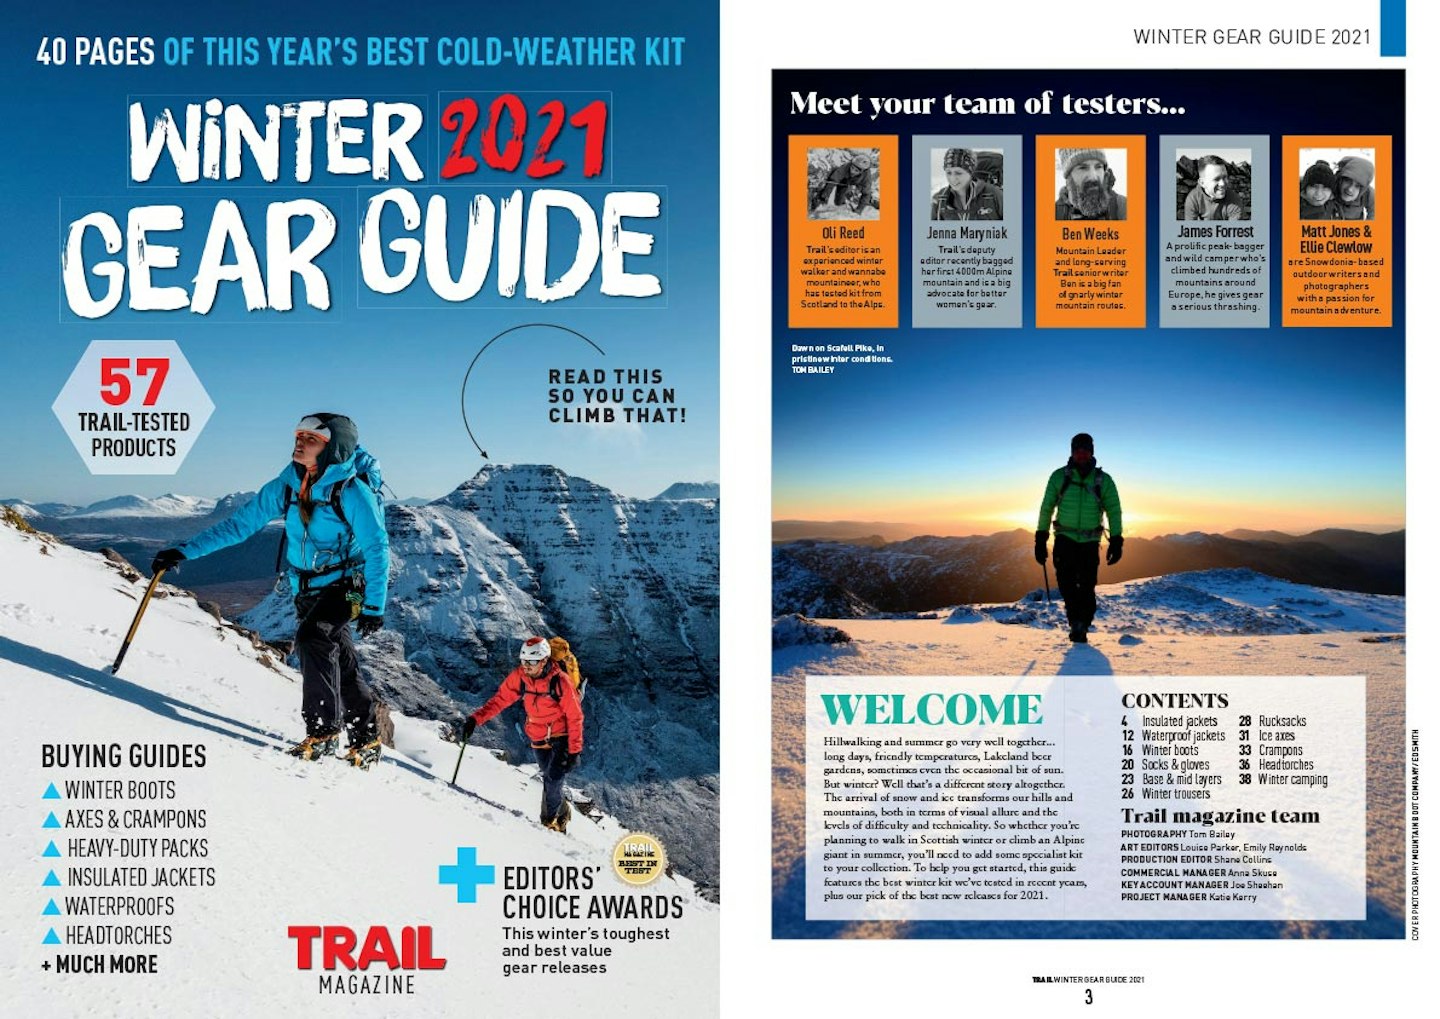 Plus a FREE 40-page winter gear guide!